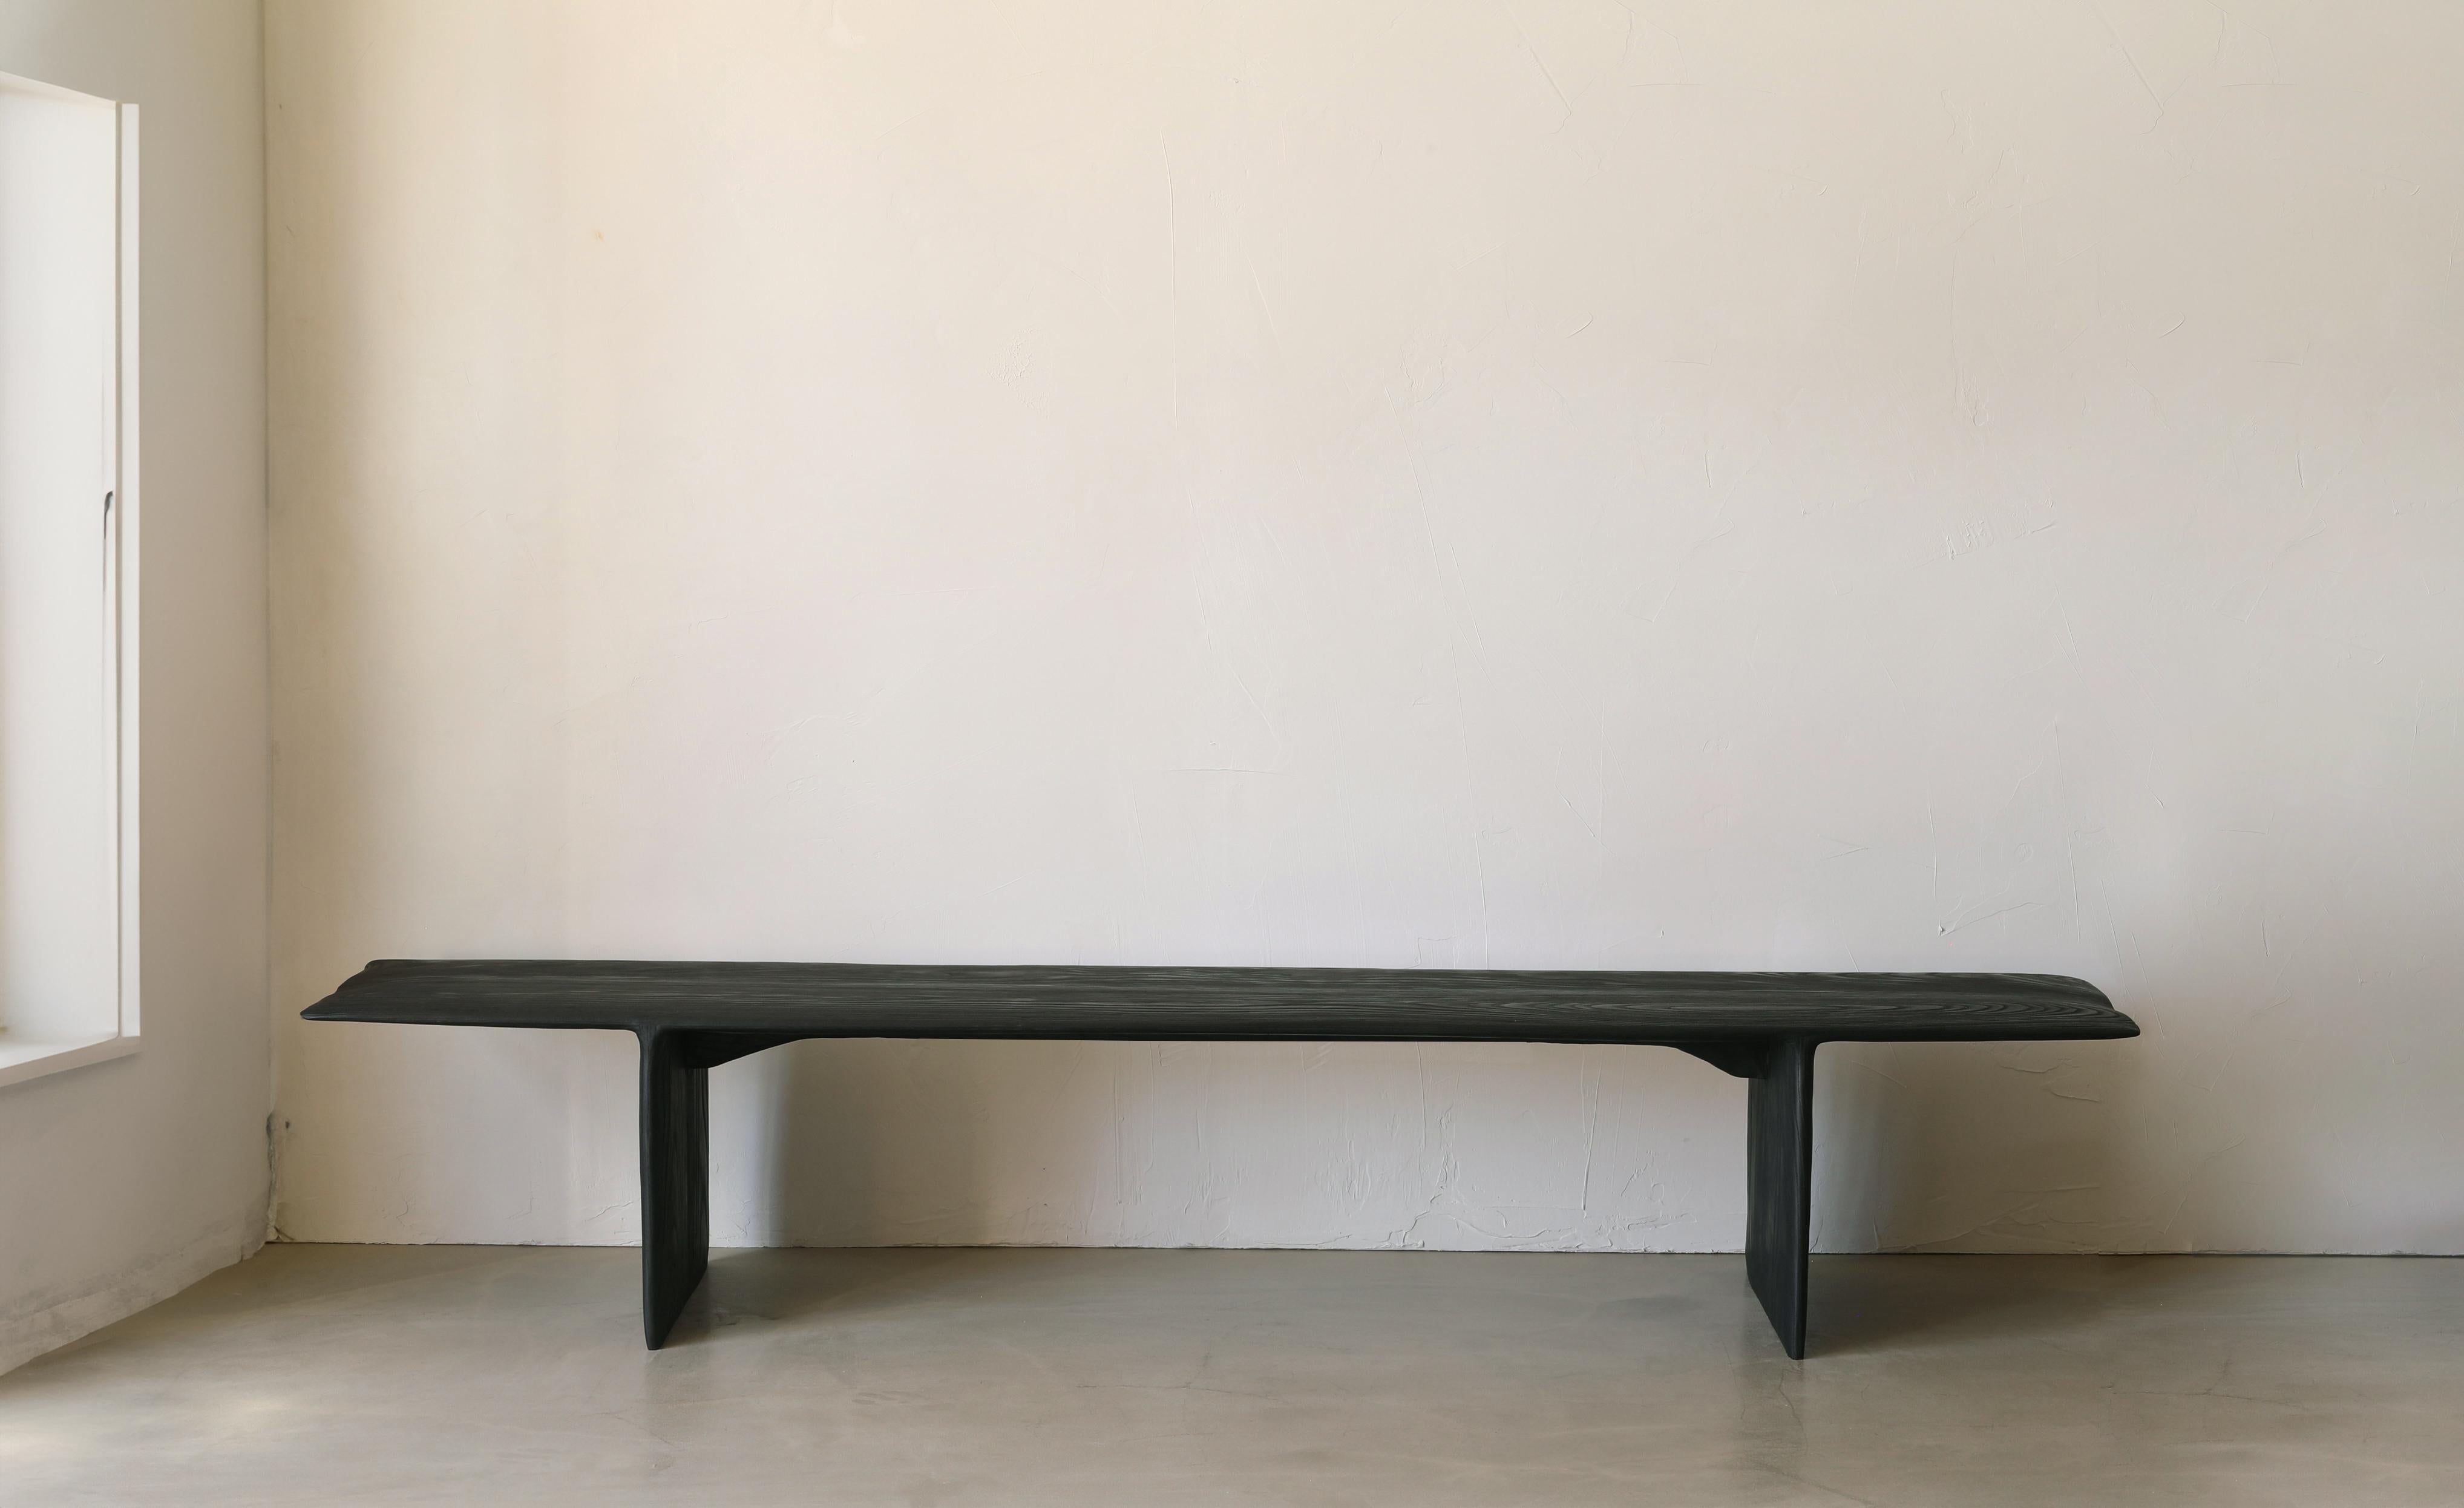 The Figures Bench is a 7-foot bench with a 16” deep seat and 16” height. The default top and base are burnt ash but can be optioned out at additional cost.

The piece comes from the FIGURES collection which can be easily identified by its visually